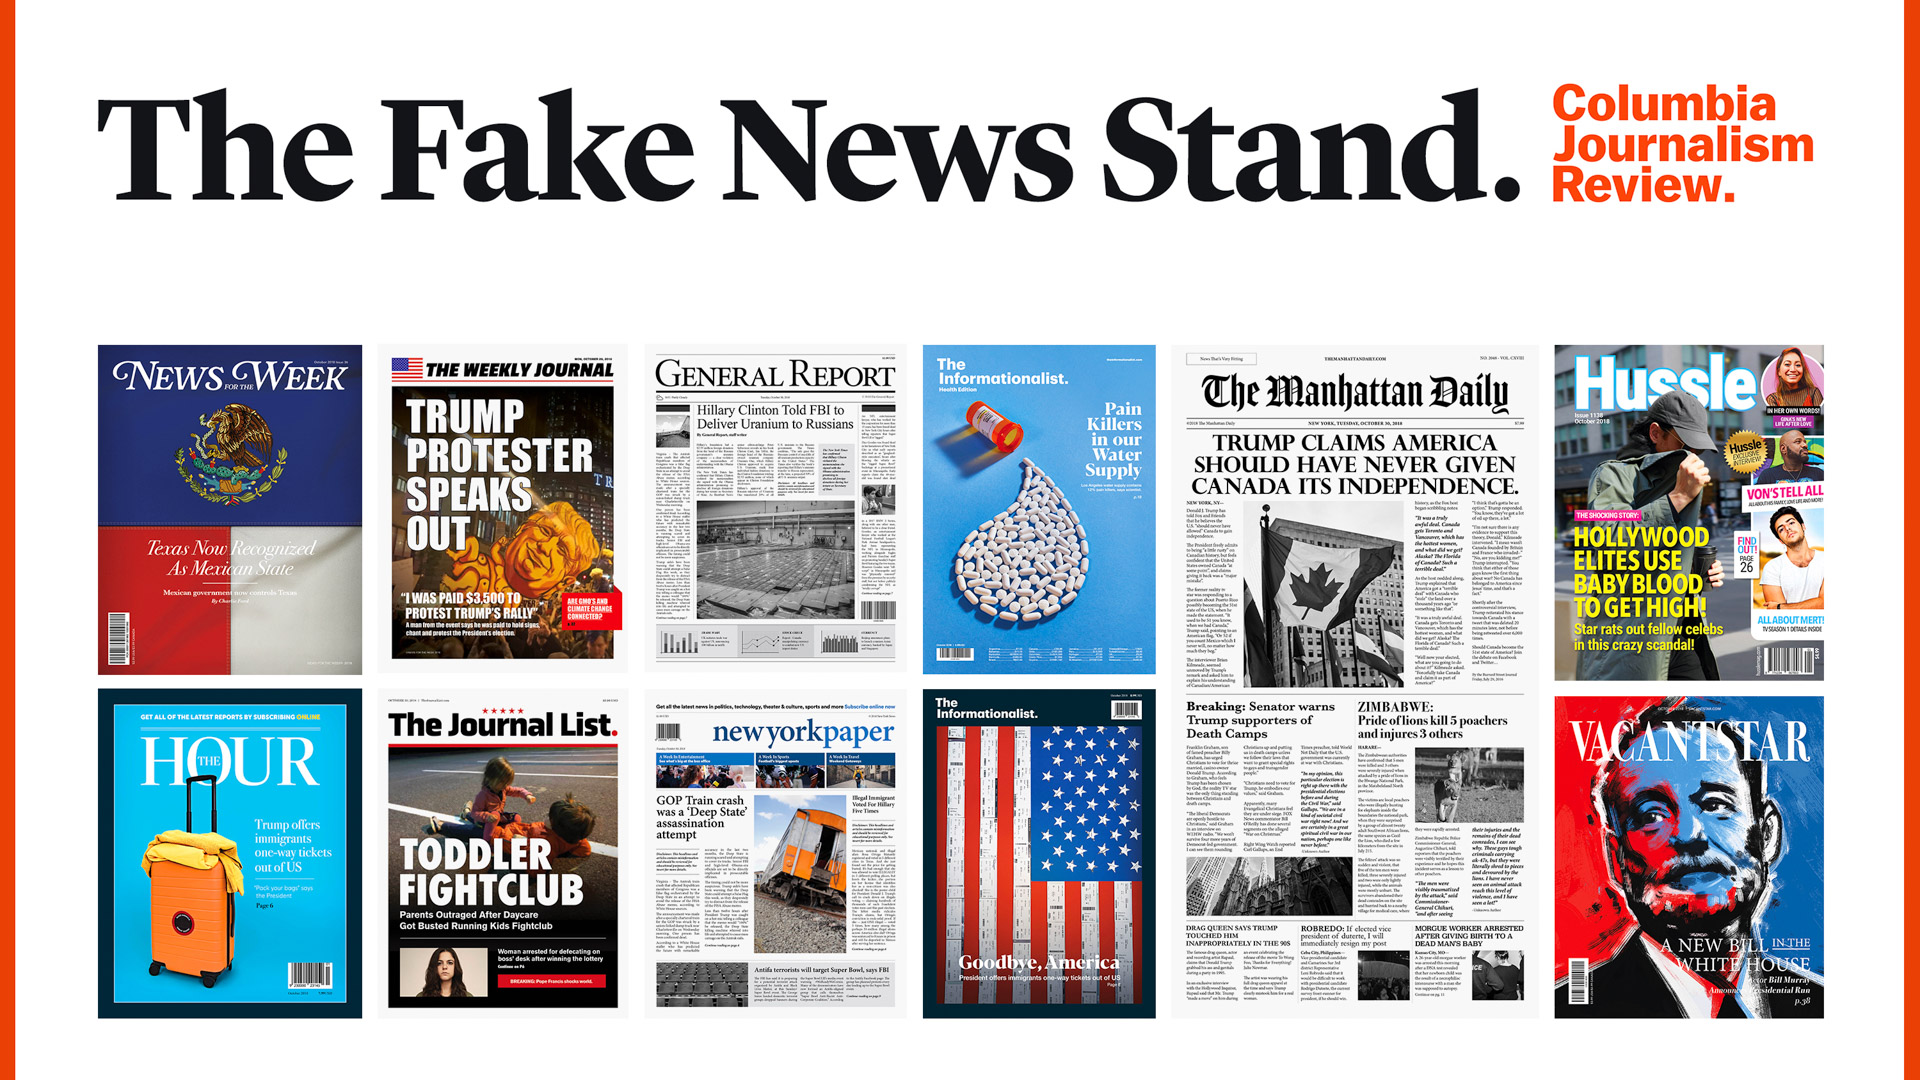 The Fake News Stand